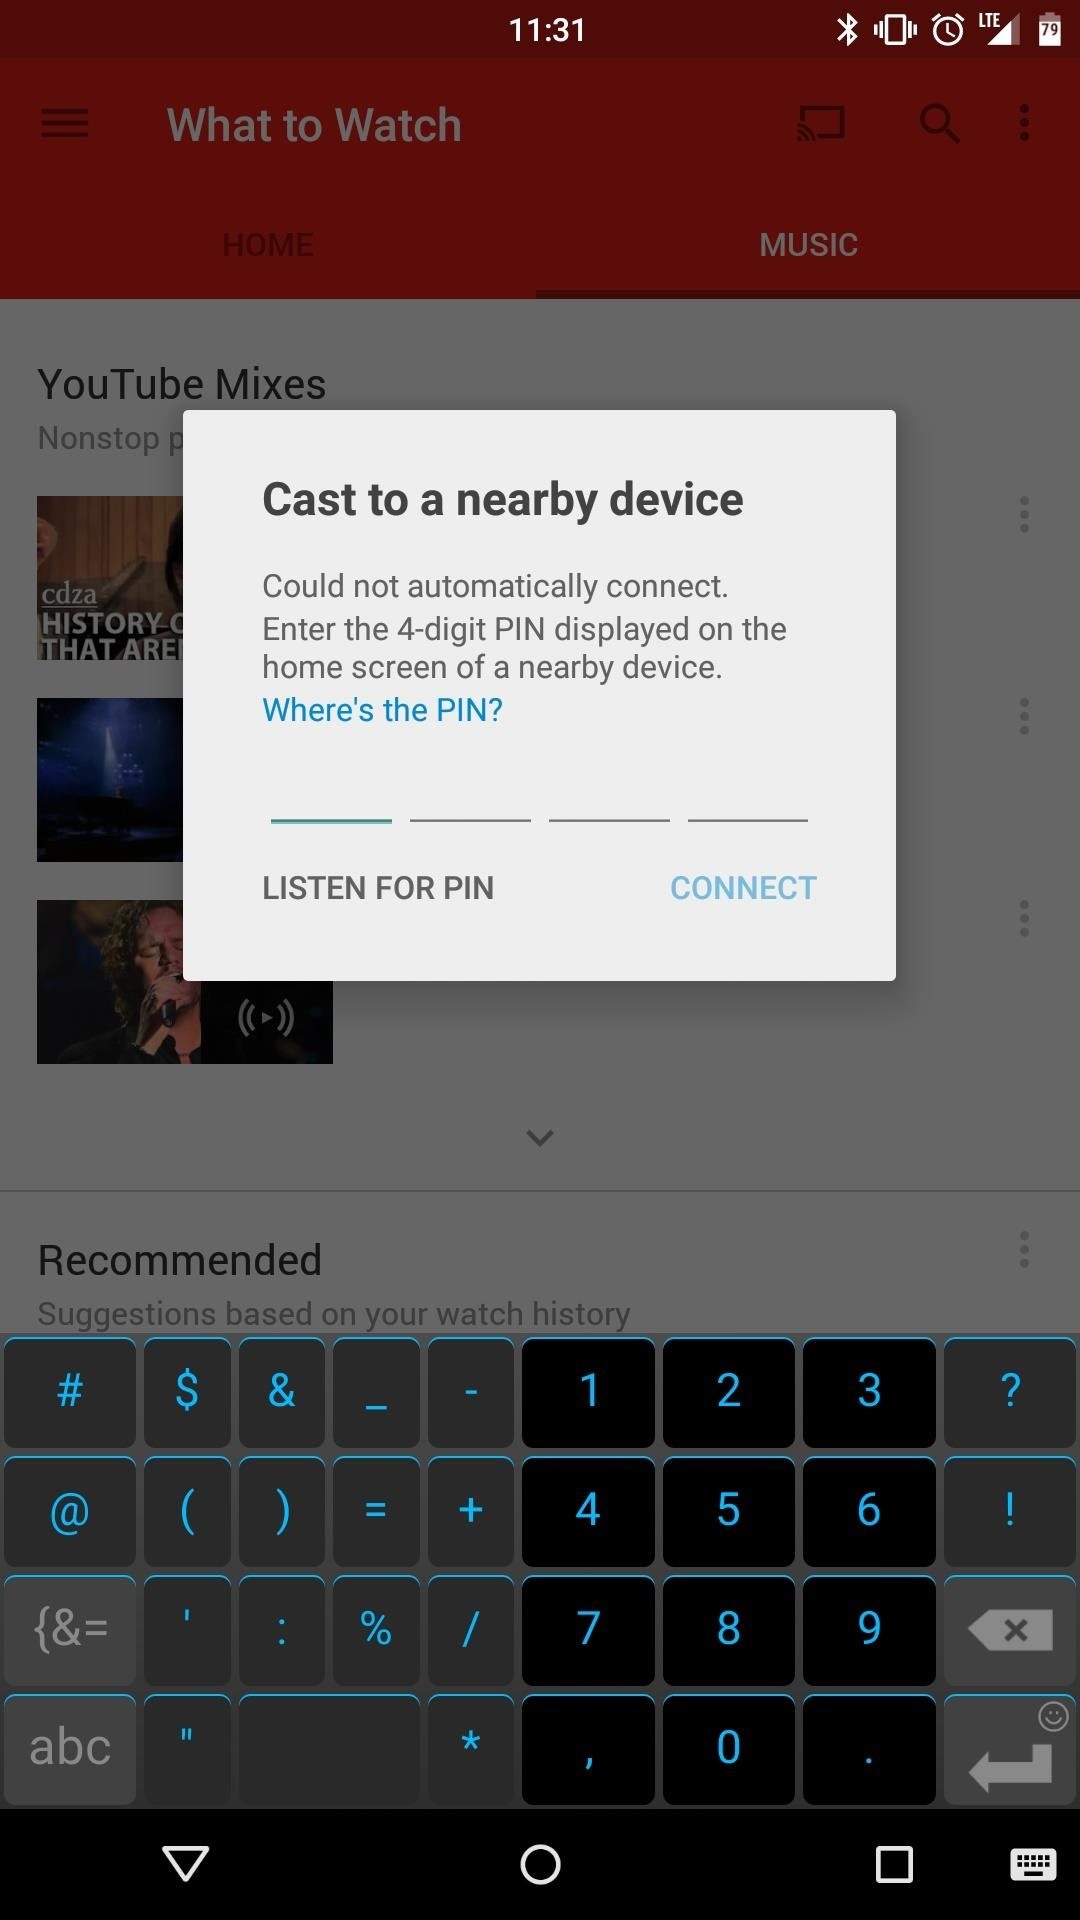 Stop Handing Out Your Wi-Fi Password by Enabling "Guest Mode" on Your Chromecast